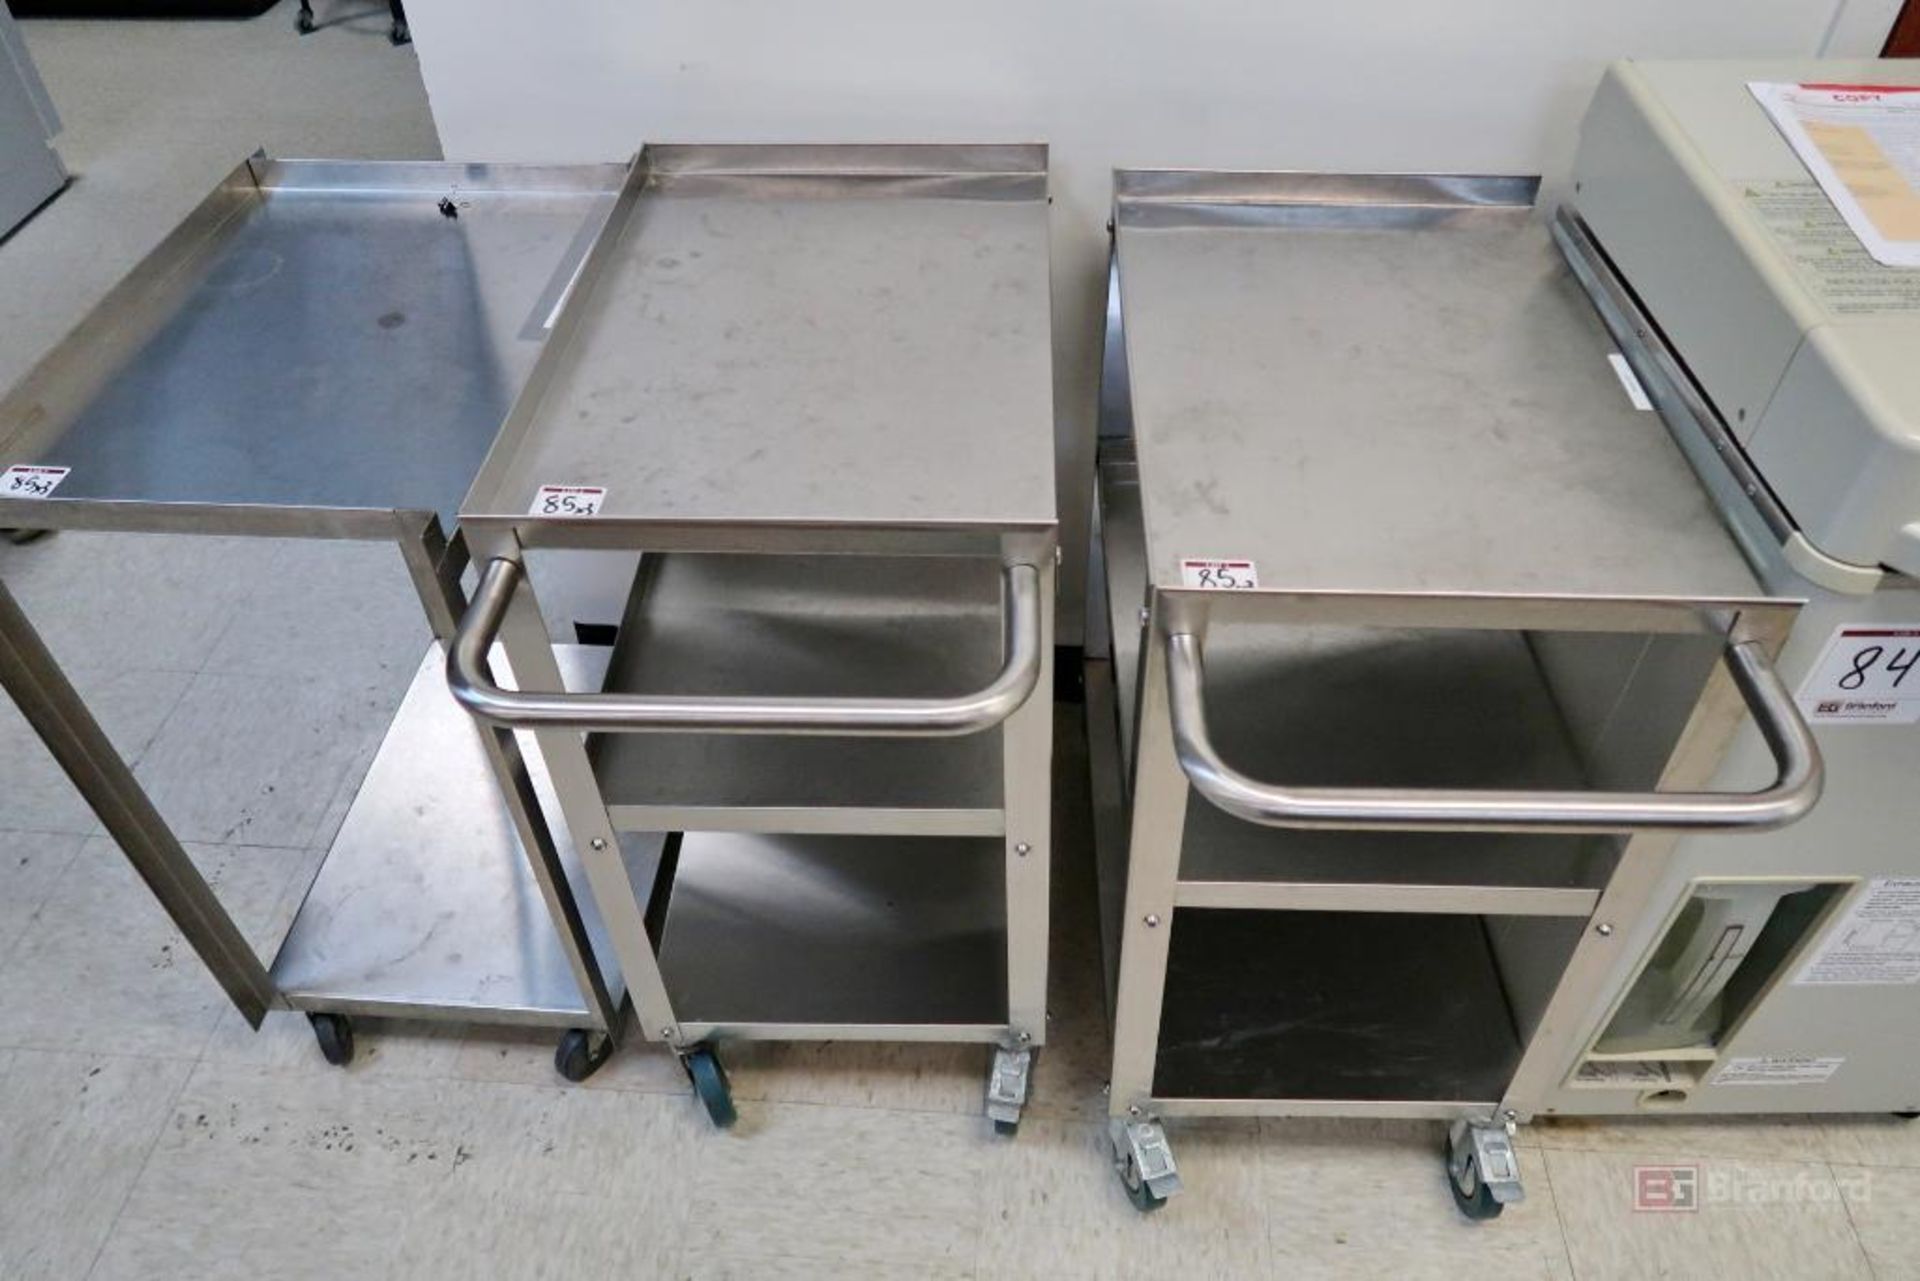 (3) Stainless Steel rolling utility carts